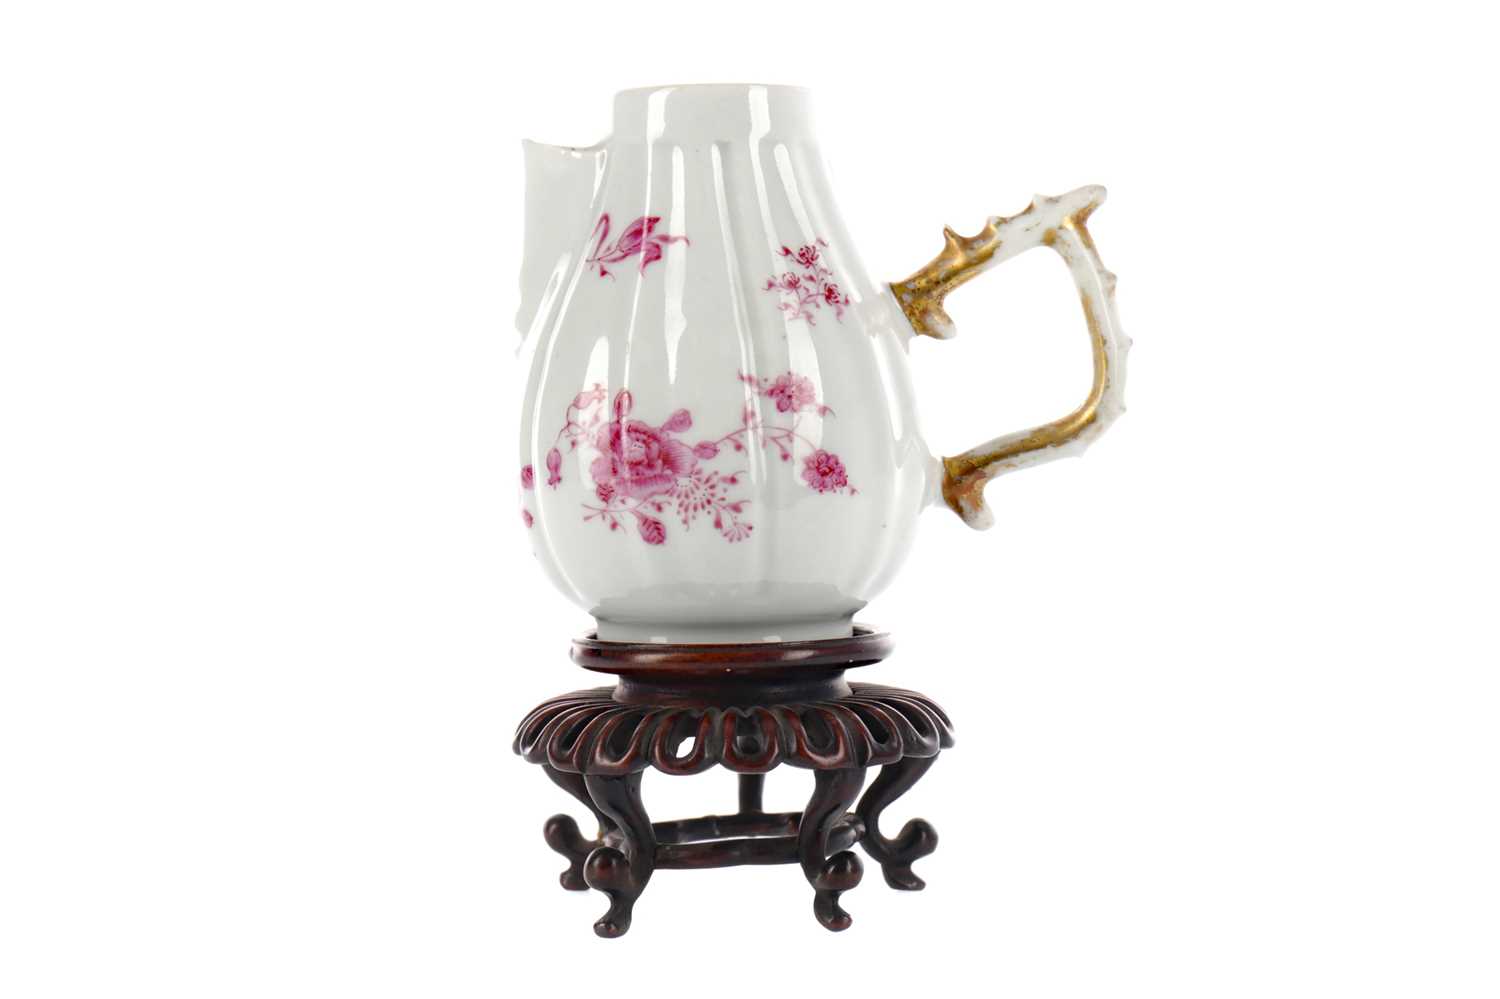 Lot 365 - A LATE 19TH CENTURY CHINESE FAMILLE ROSE CREAM JUG